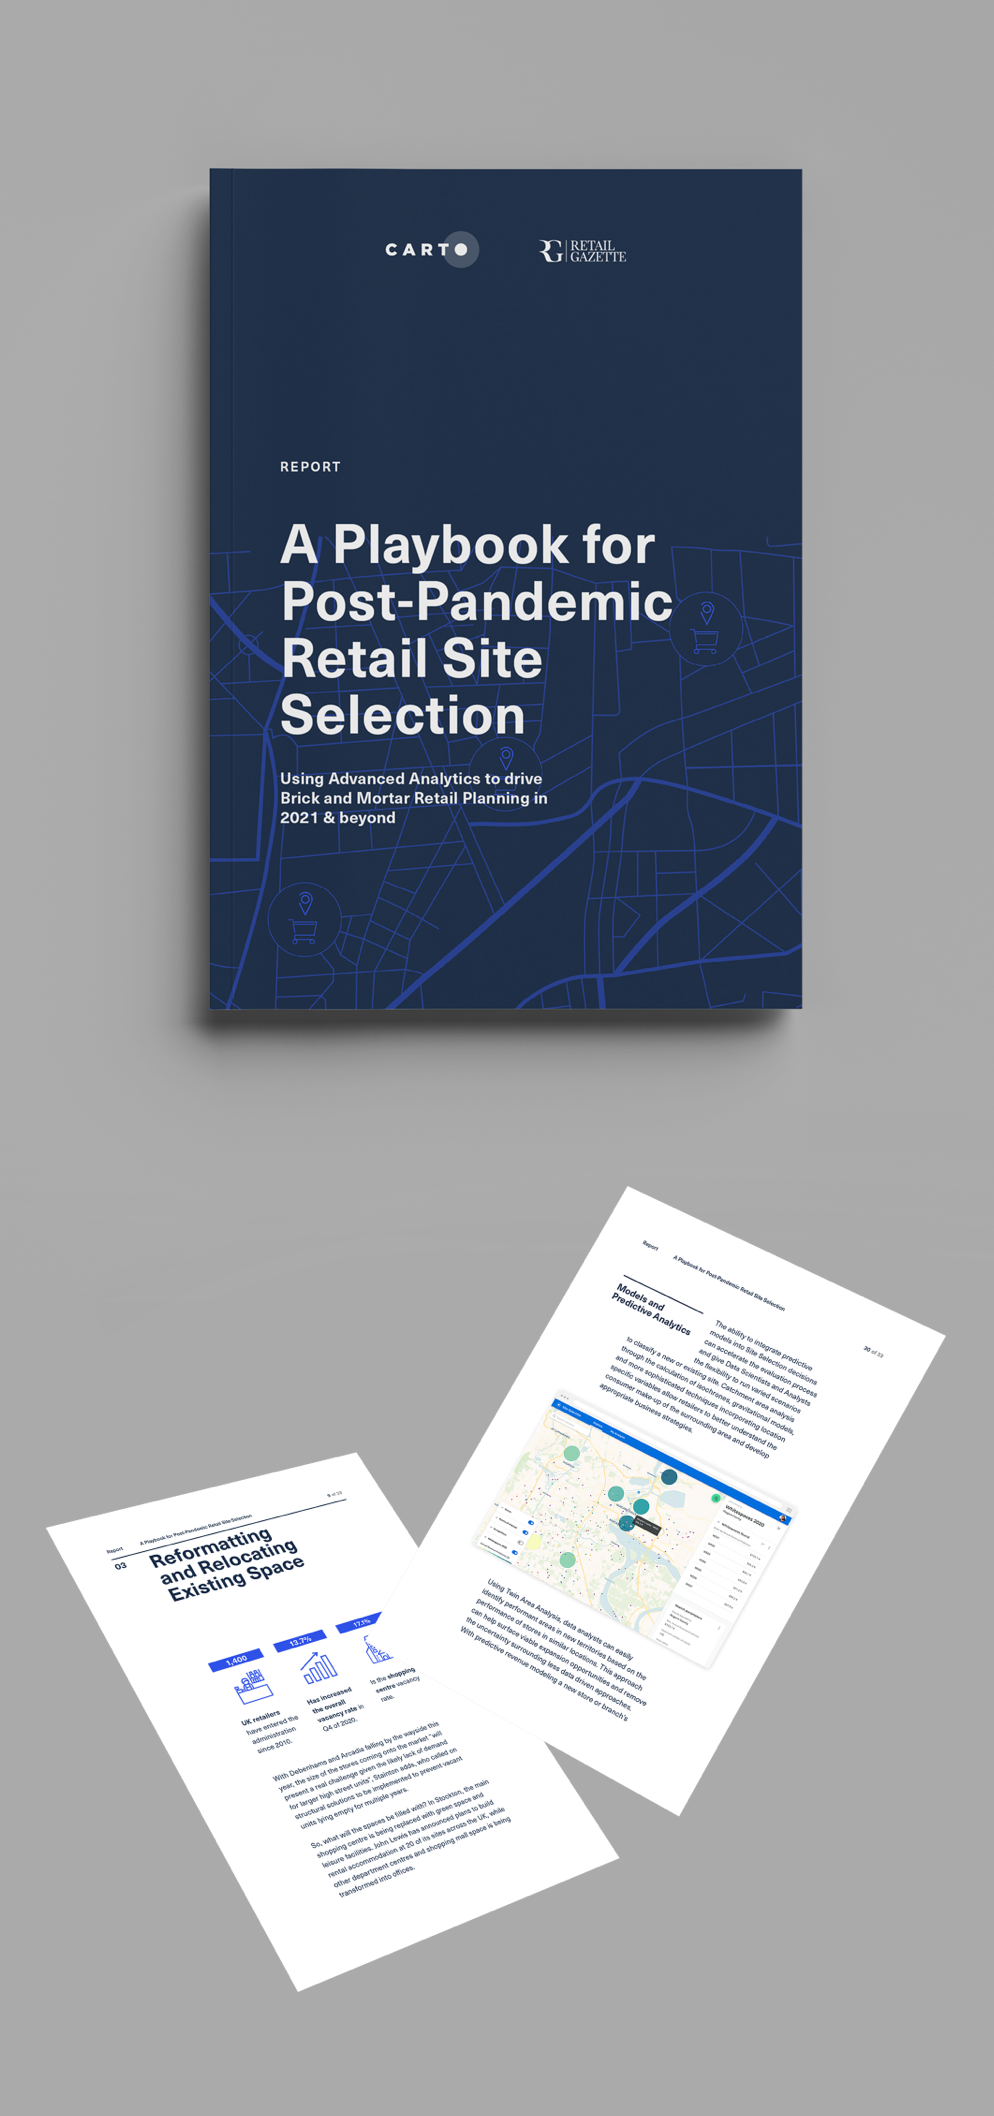 A Playbook for Post-Pandemic Retail Site Selection